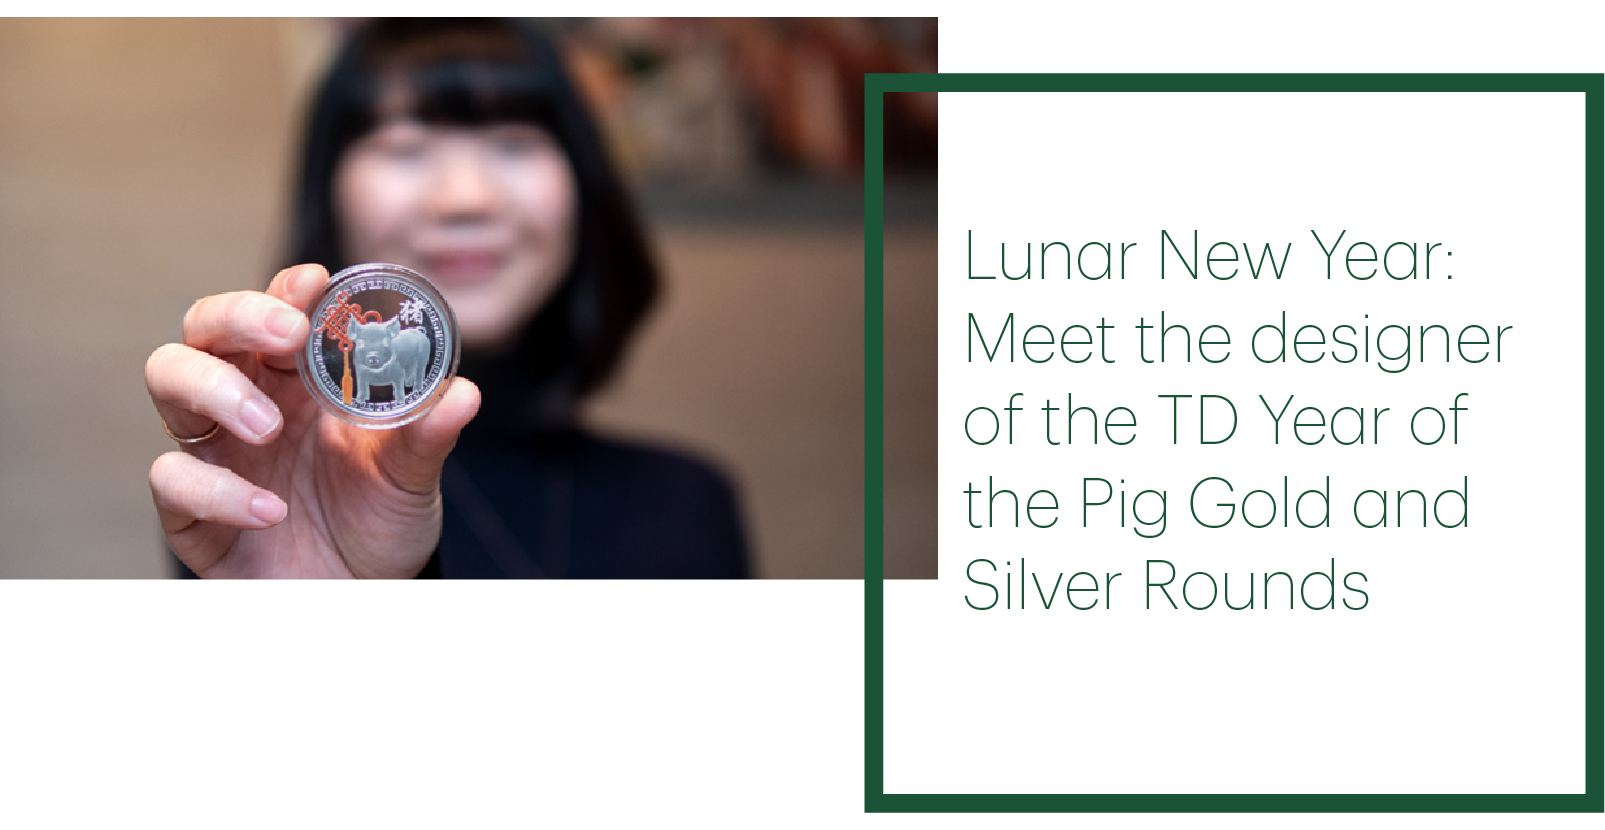 Links off to story says Lunar New Year: Meet the designer of the TD Year of the Pig Gold and Silver Rounds.